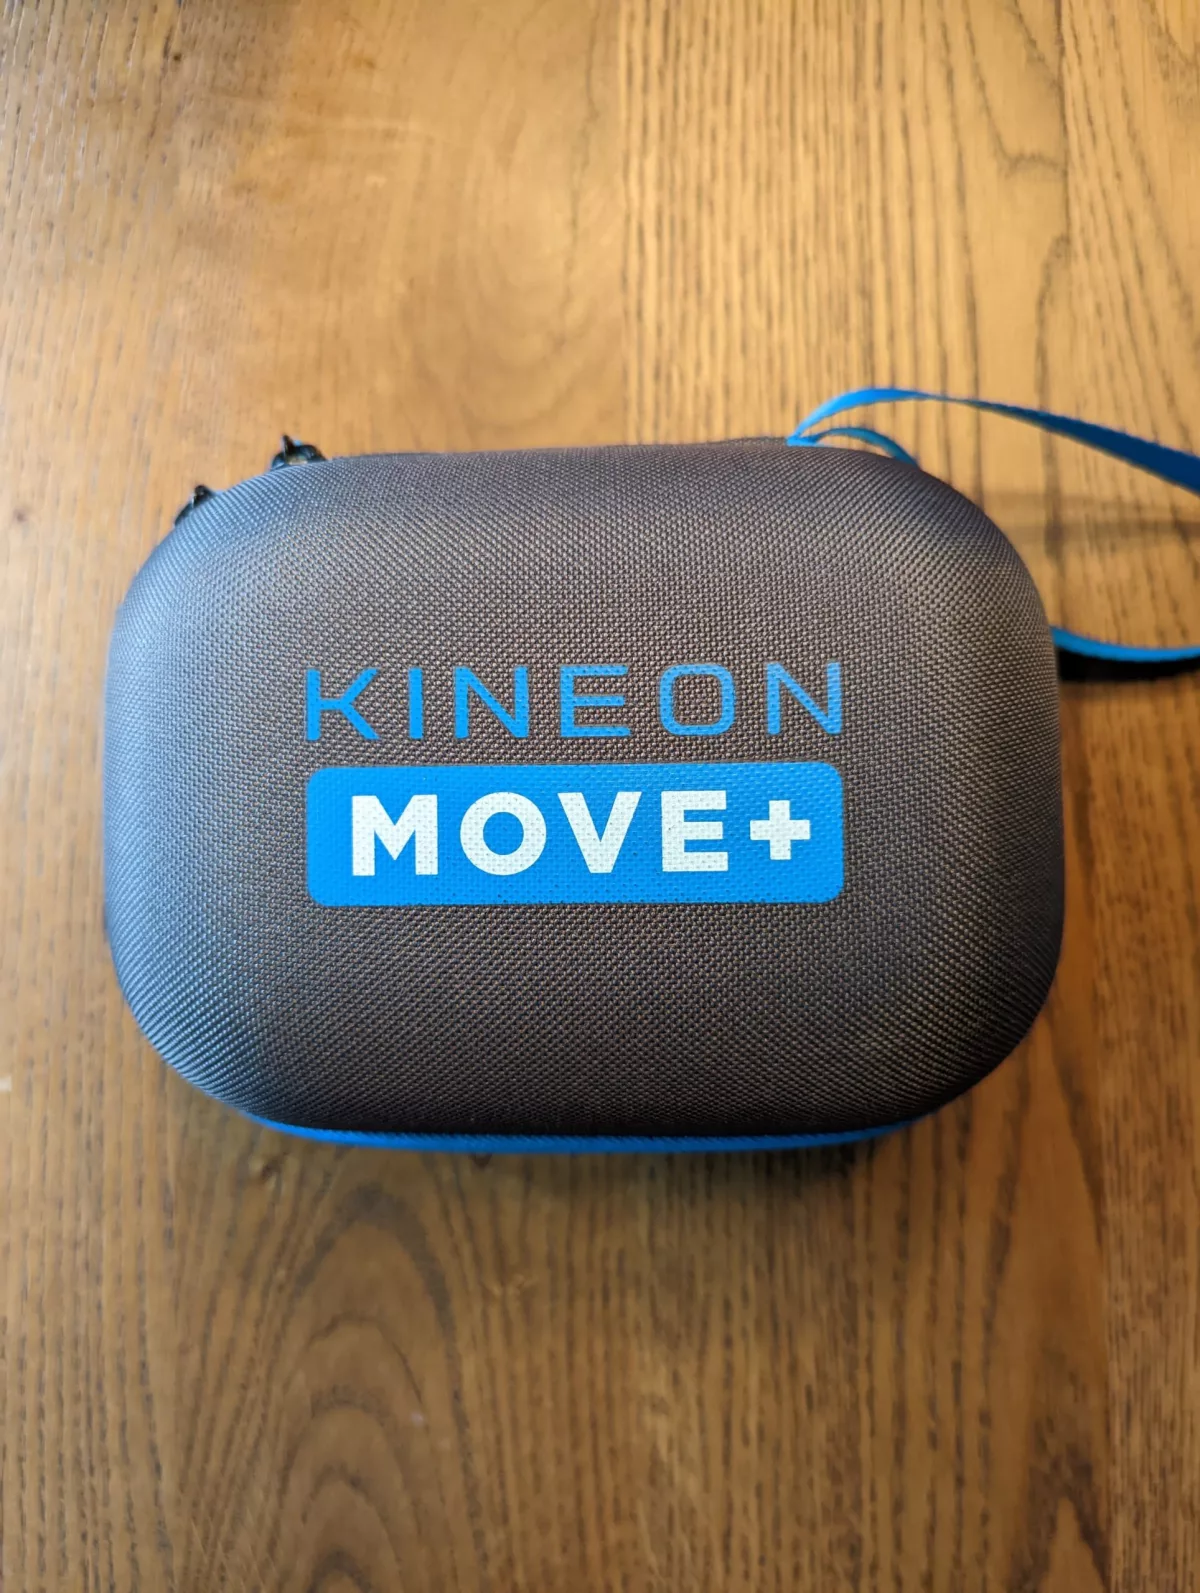 Kineon Move+ Review